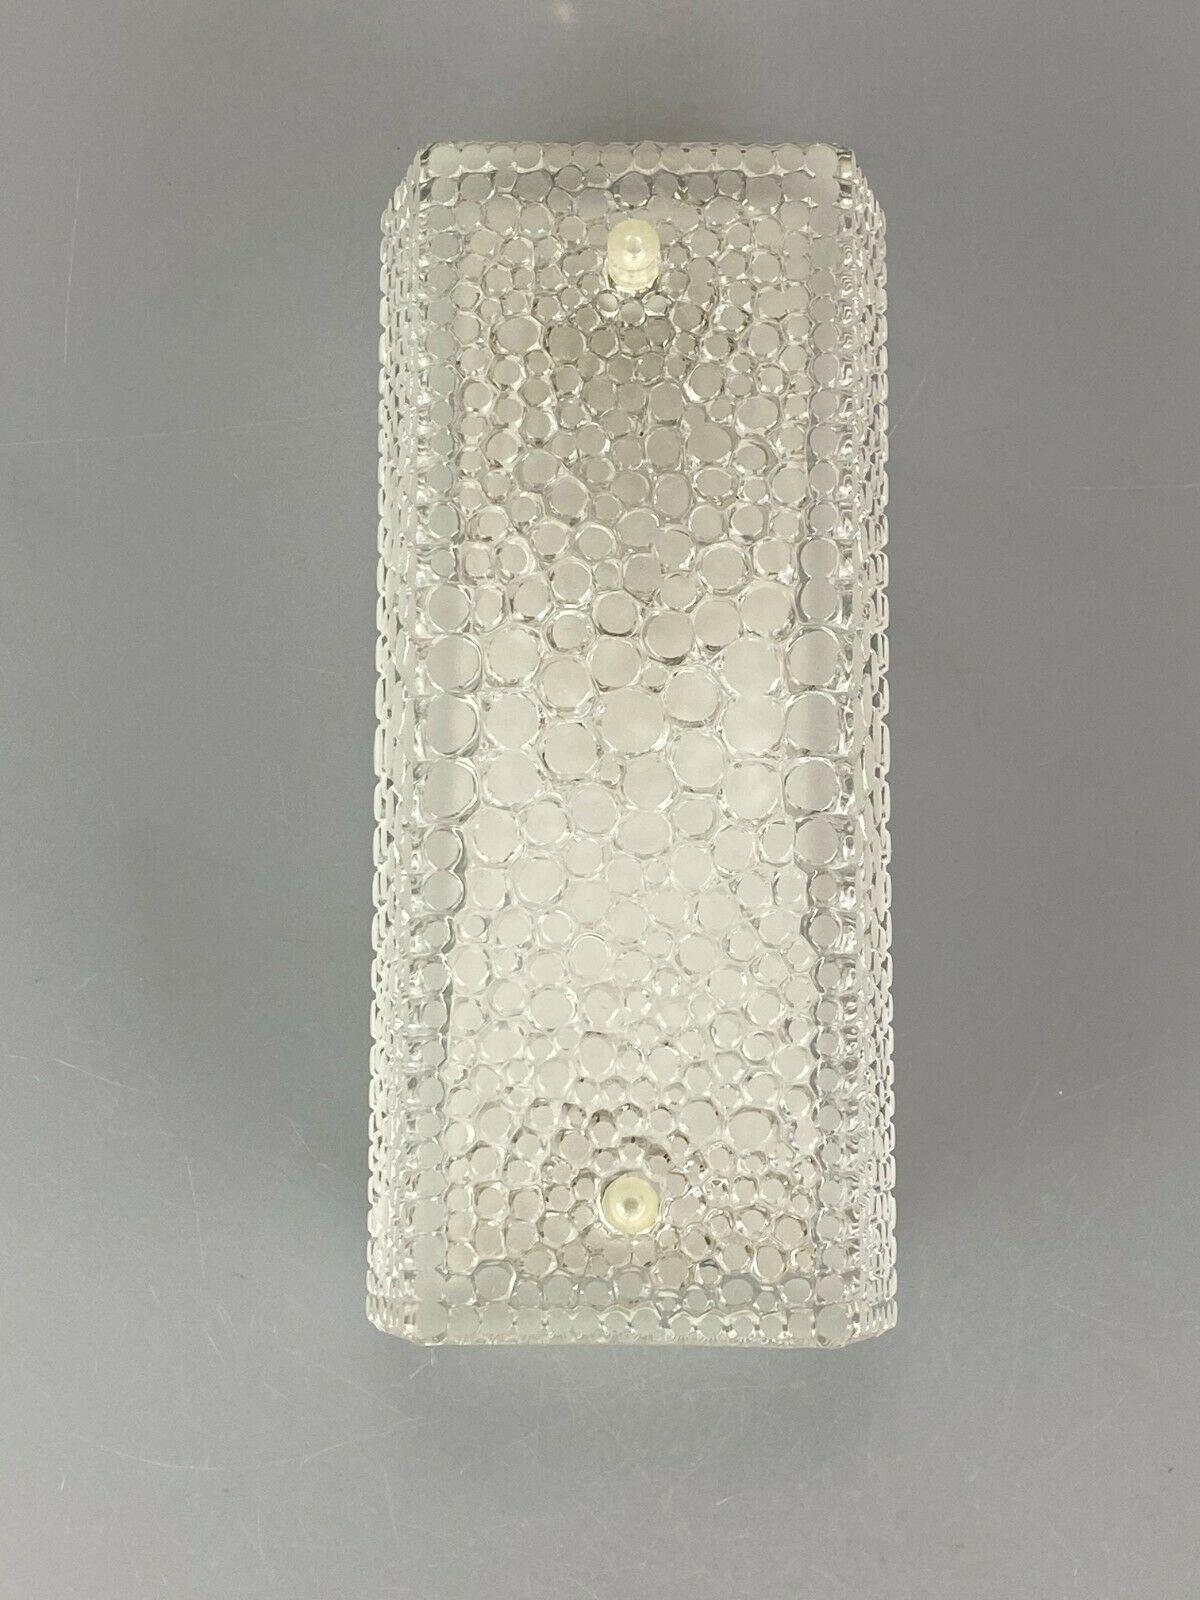 60s 70s Lamp fixture wall sconce wall lamp ice glass space age design

Object: wall lamp

Manufacturer:

Condition: good

Age: around 1960-1970

Dimensions:

22cm x 10cm x 7cm

Other notes:

The pictures serve as part of the